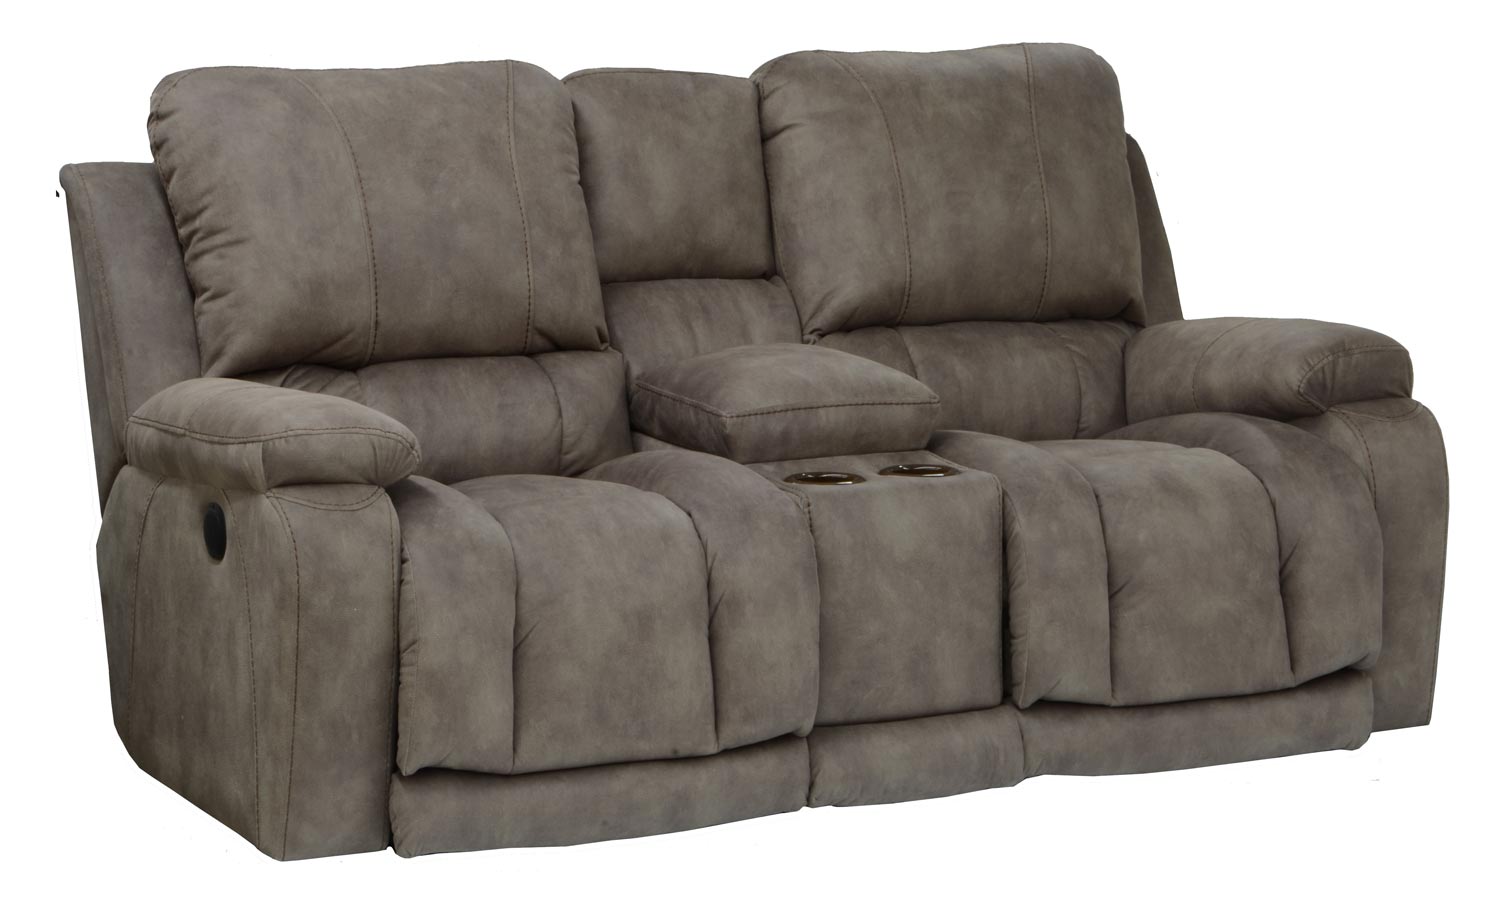 CatNapper Cosmopolitan Lay Flat Reclining Console Loveseat with Storage and Cupholders and X-tra Comfort Footrest - Pecan